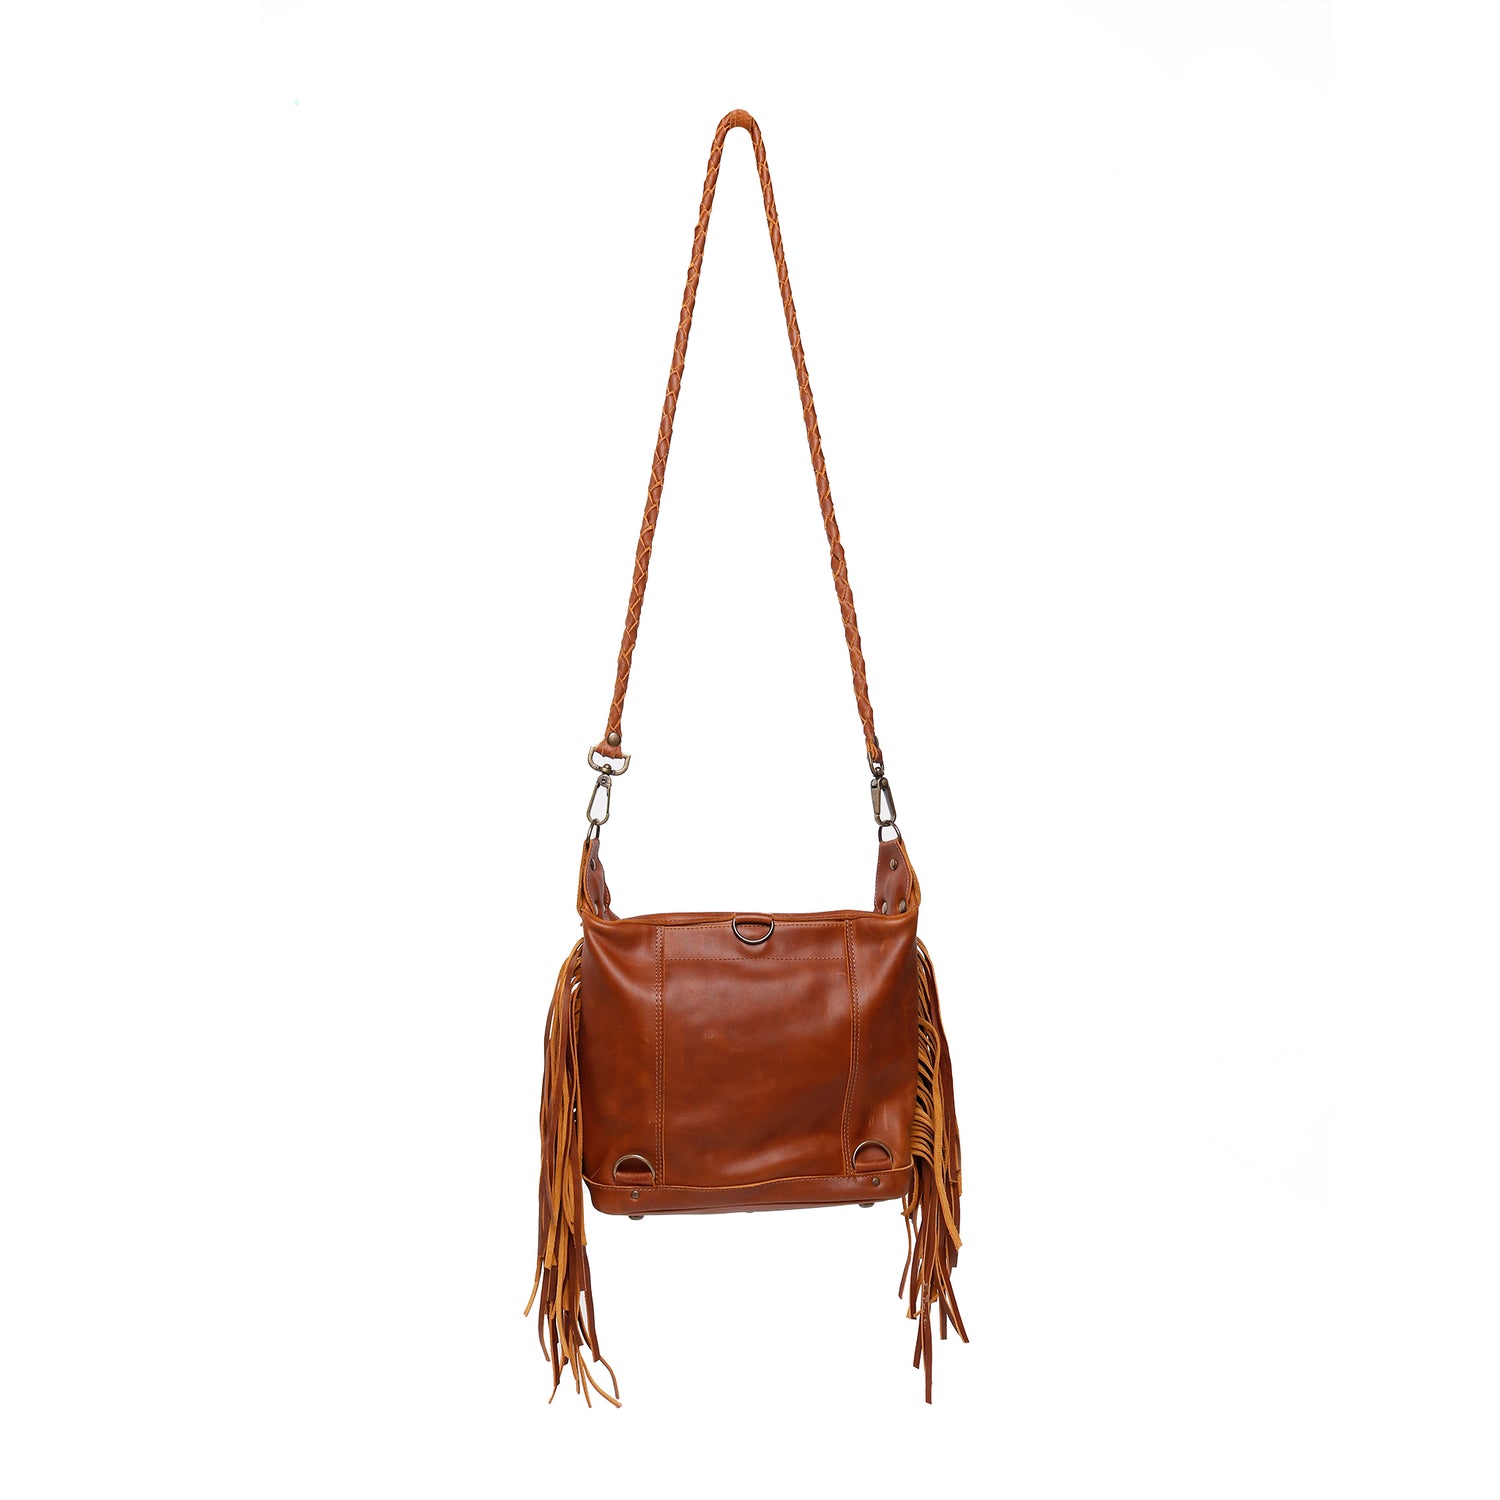 Roots Genuine Leather Fringe Purse Crossbody Brown Braided Strap